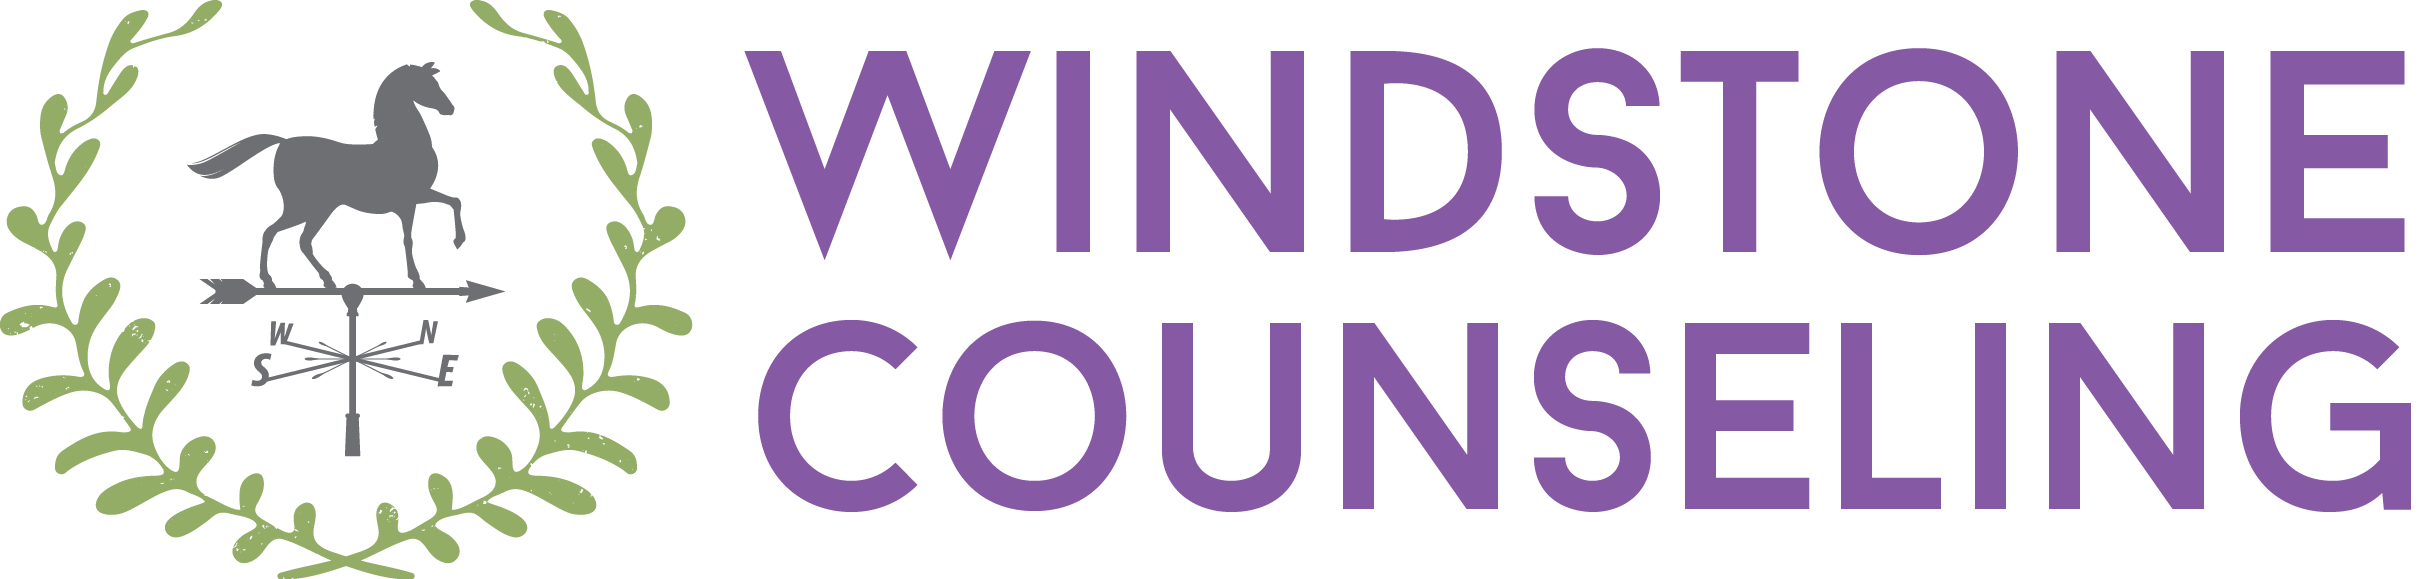 Windstone Counseling